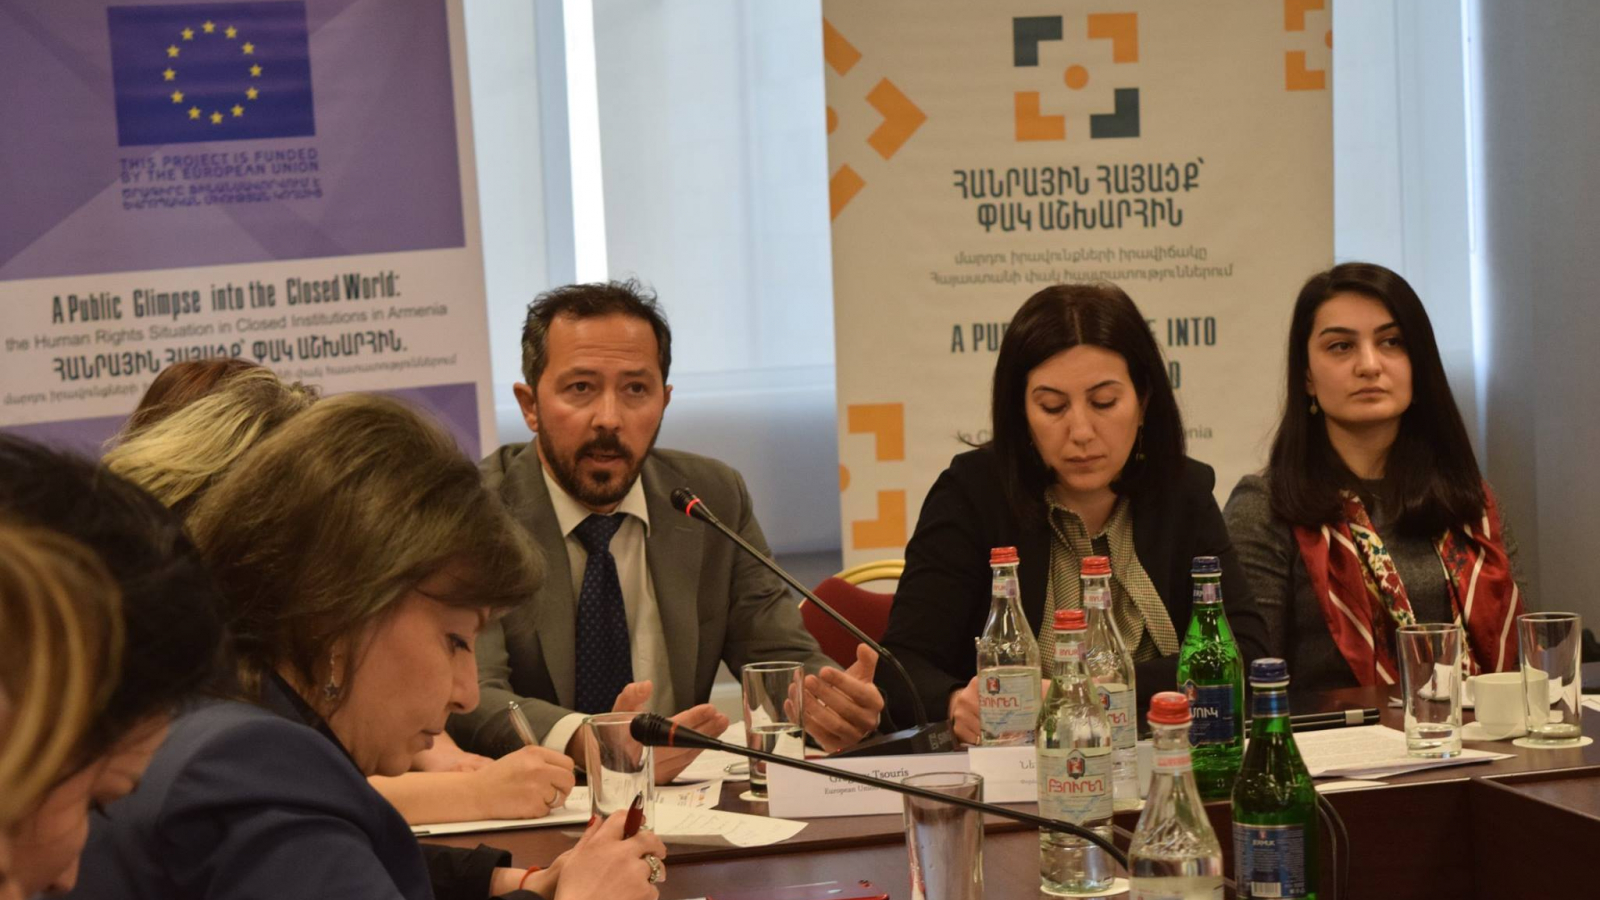 Rights of children and young people discussed at workshop in Armenia